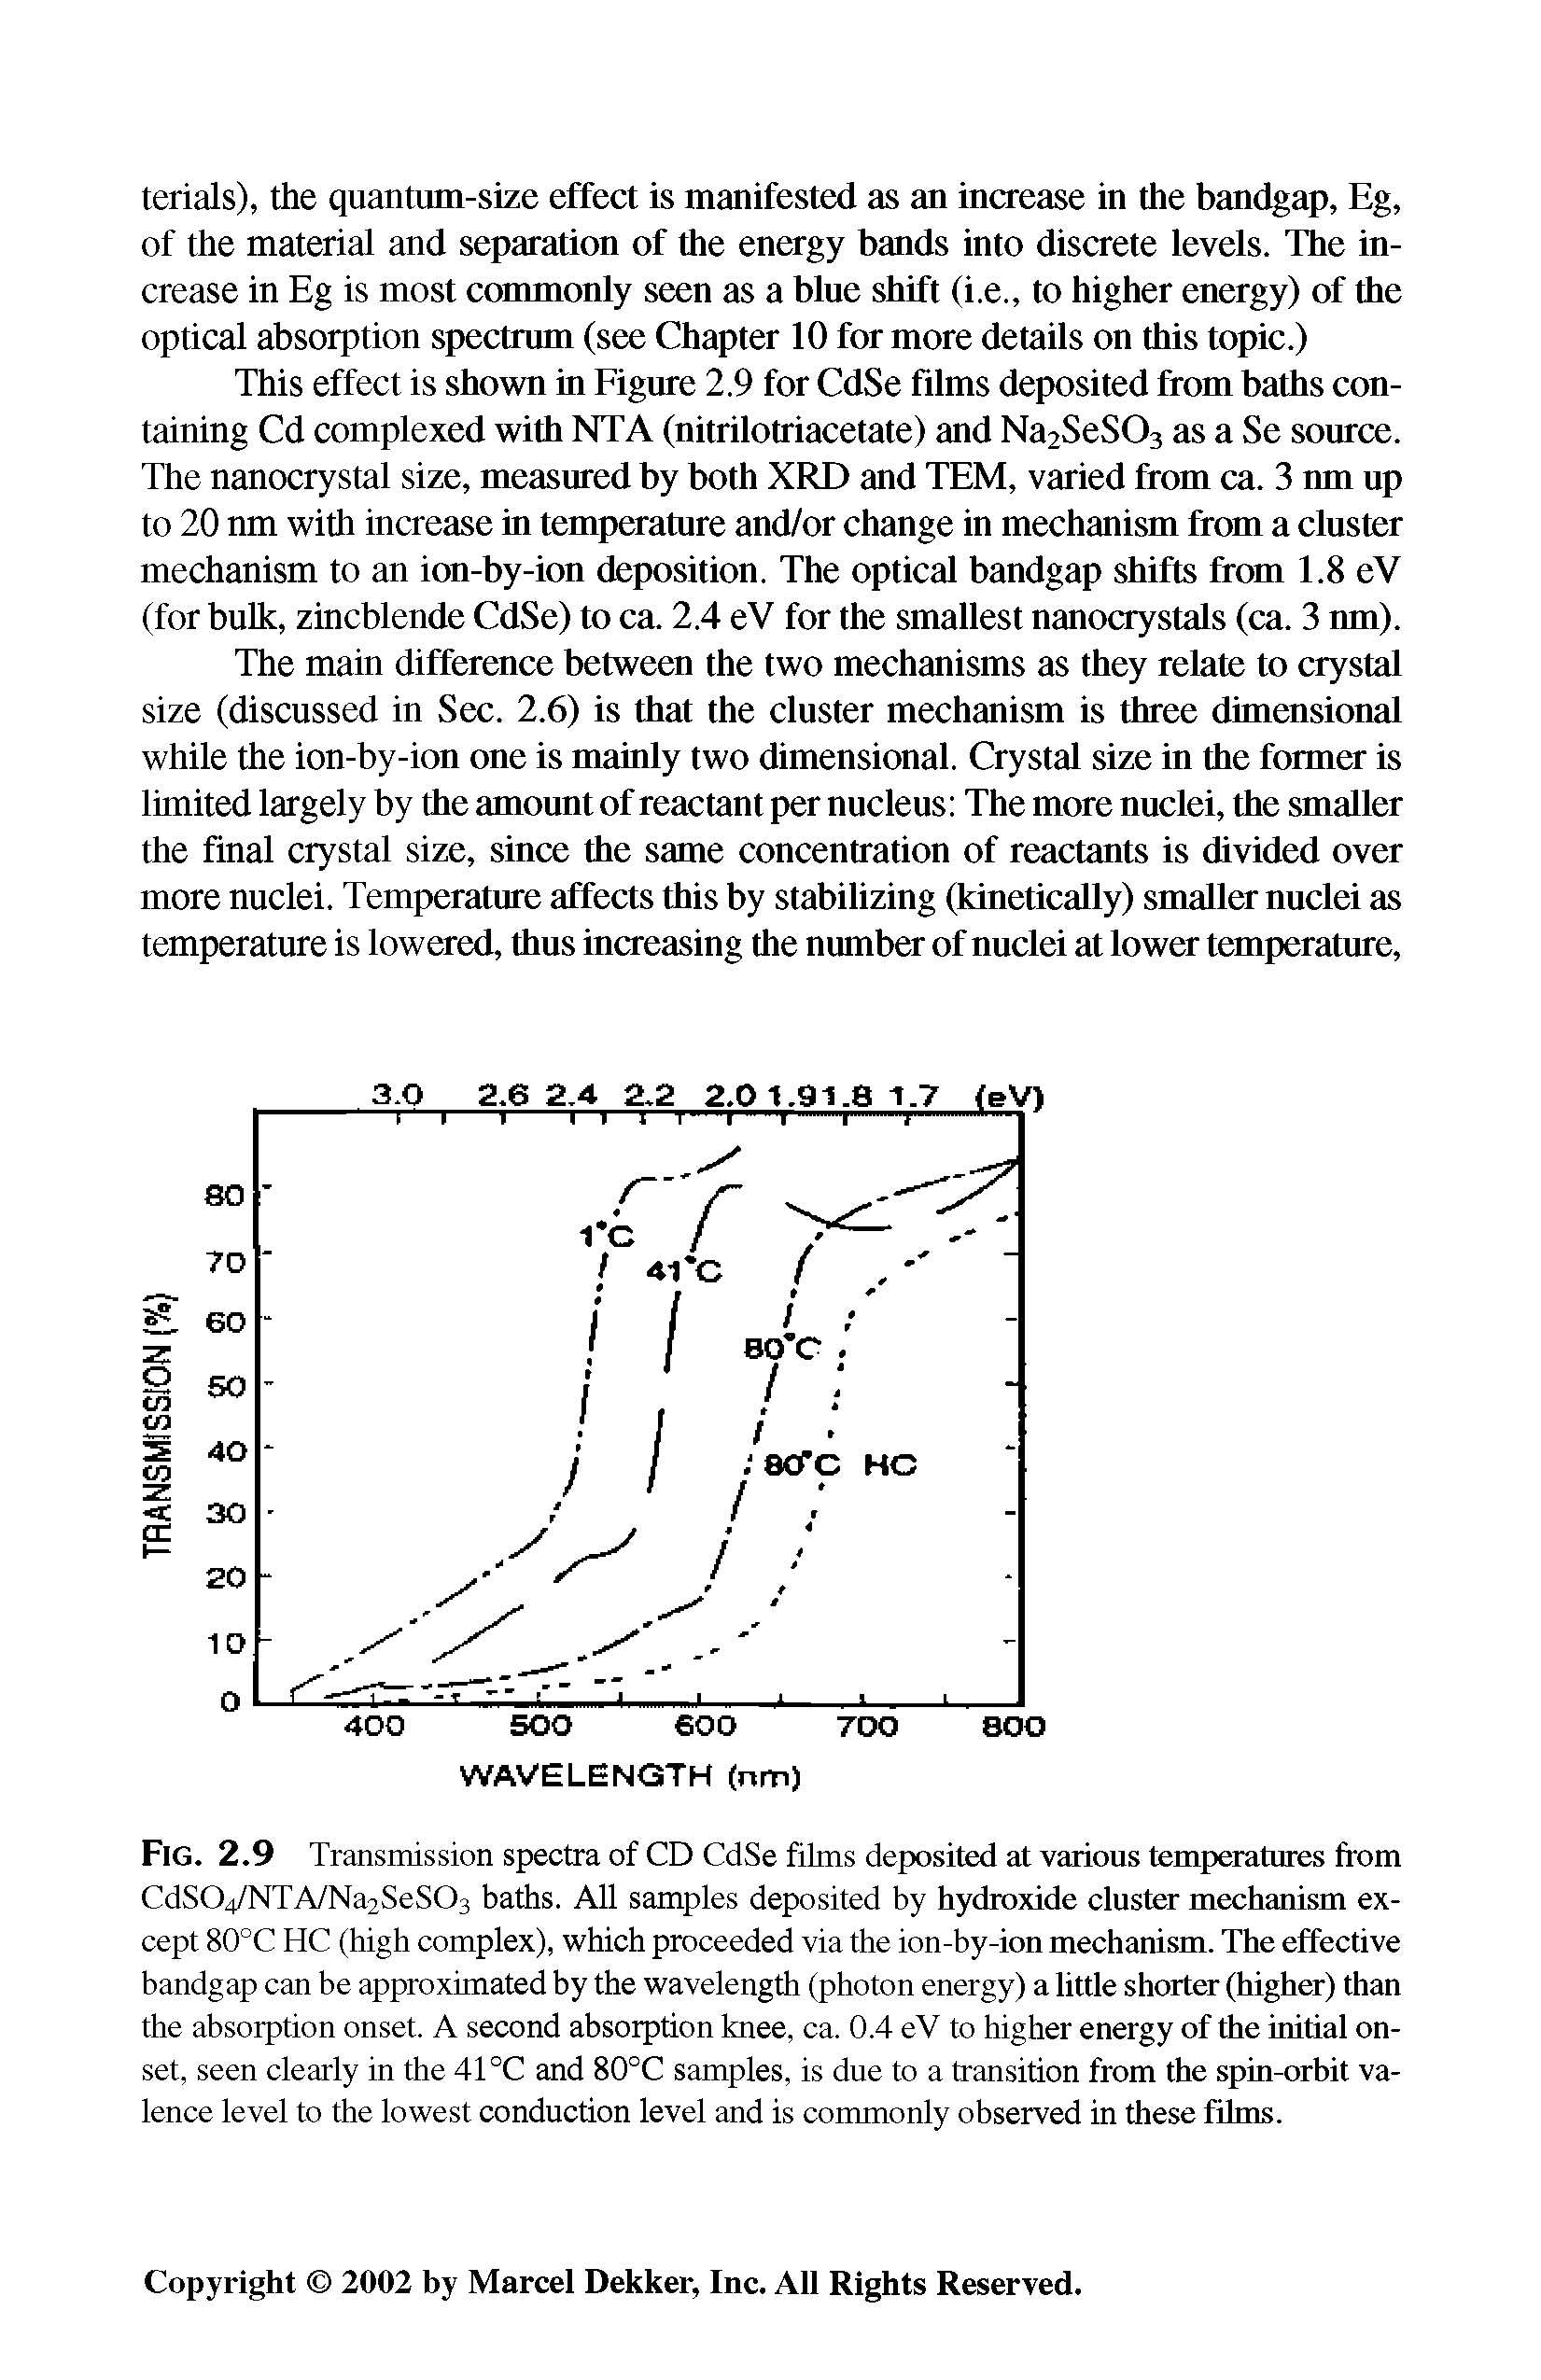 Fig. 2.9 Transmission spectra of CD CdSe films deposited at various temperatures from CdS04/NTA/Na2SeS03 baths. All samples deposited by hydroxide cluster mechanism except 80°C HC (high complex), which proceeded via the ion-by-ion mechanism. The effective bandgap can be approximated by the wavelength (photon energy) a little shorter (higher) than the absorption onset. A second absorption knee, ca. 0.4 eV to higher energy of the initial onset, seen clearly in the 41 °C and 80°C samples, is due to a transition from the spin-orbit valence level to the lowest conduction level and is commonly observed in these films.